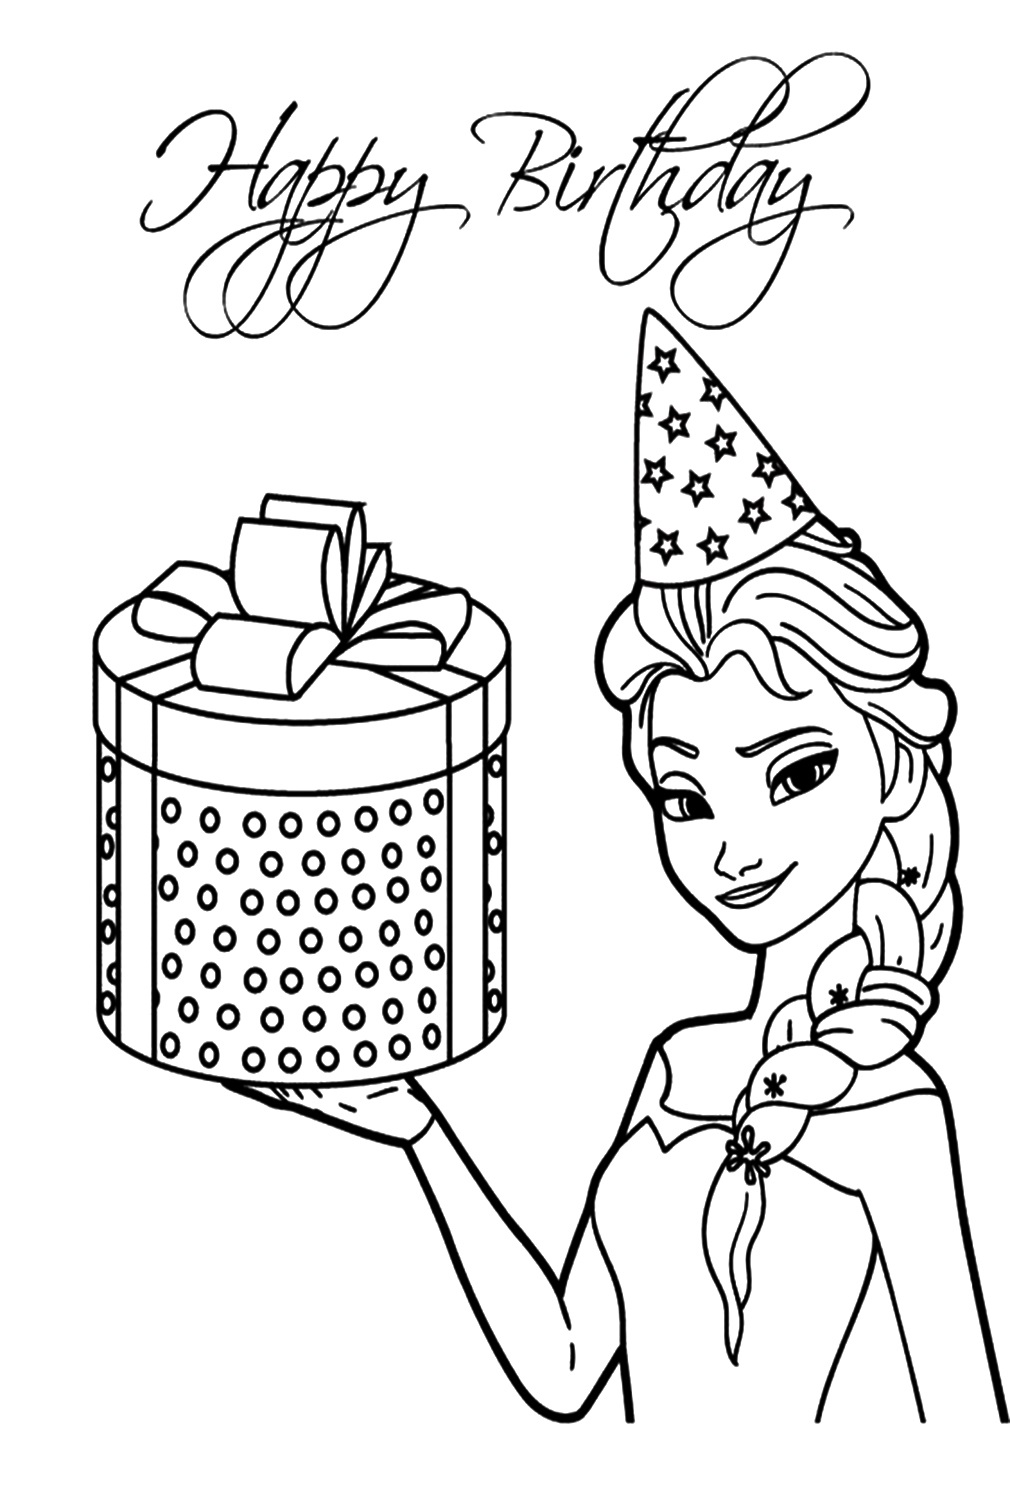 Elsa Happy Birthday Coloring Pages